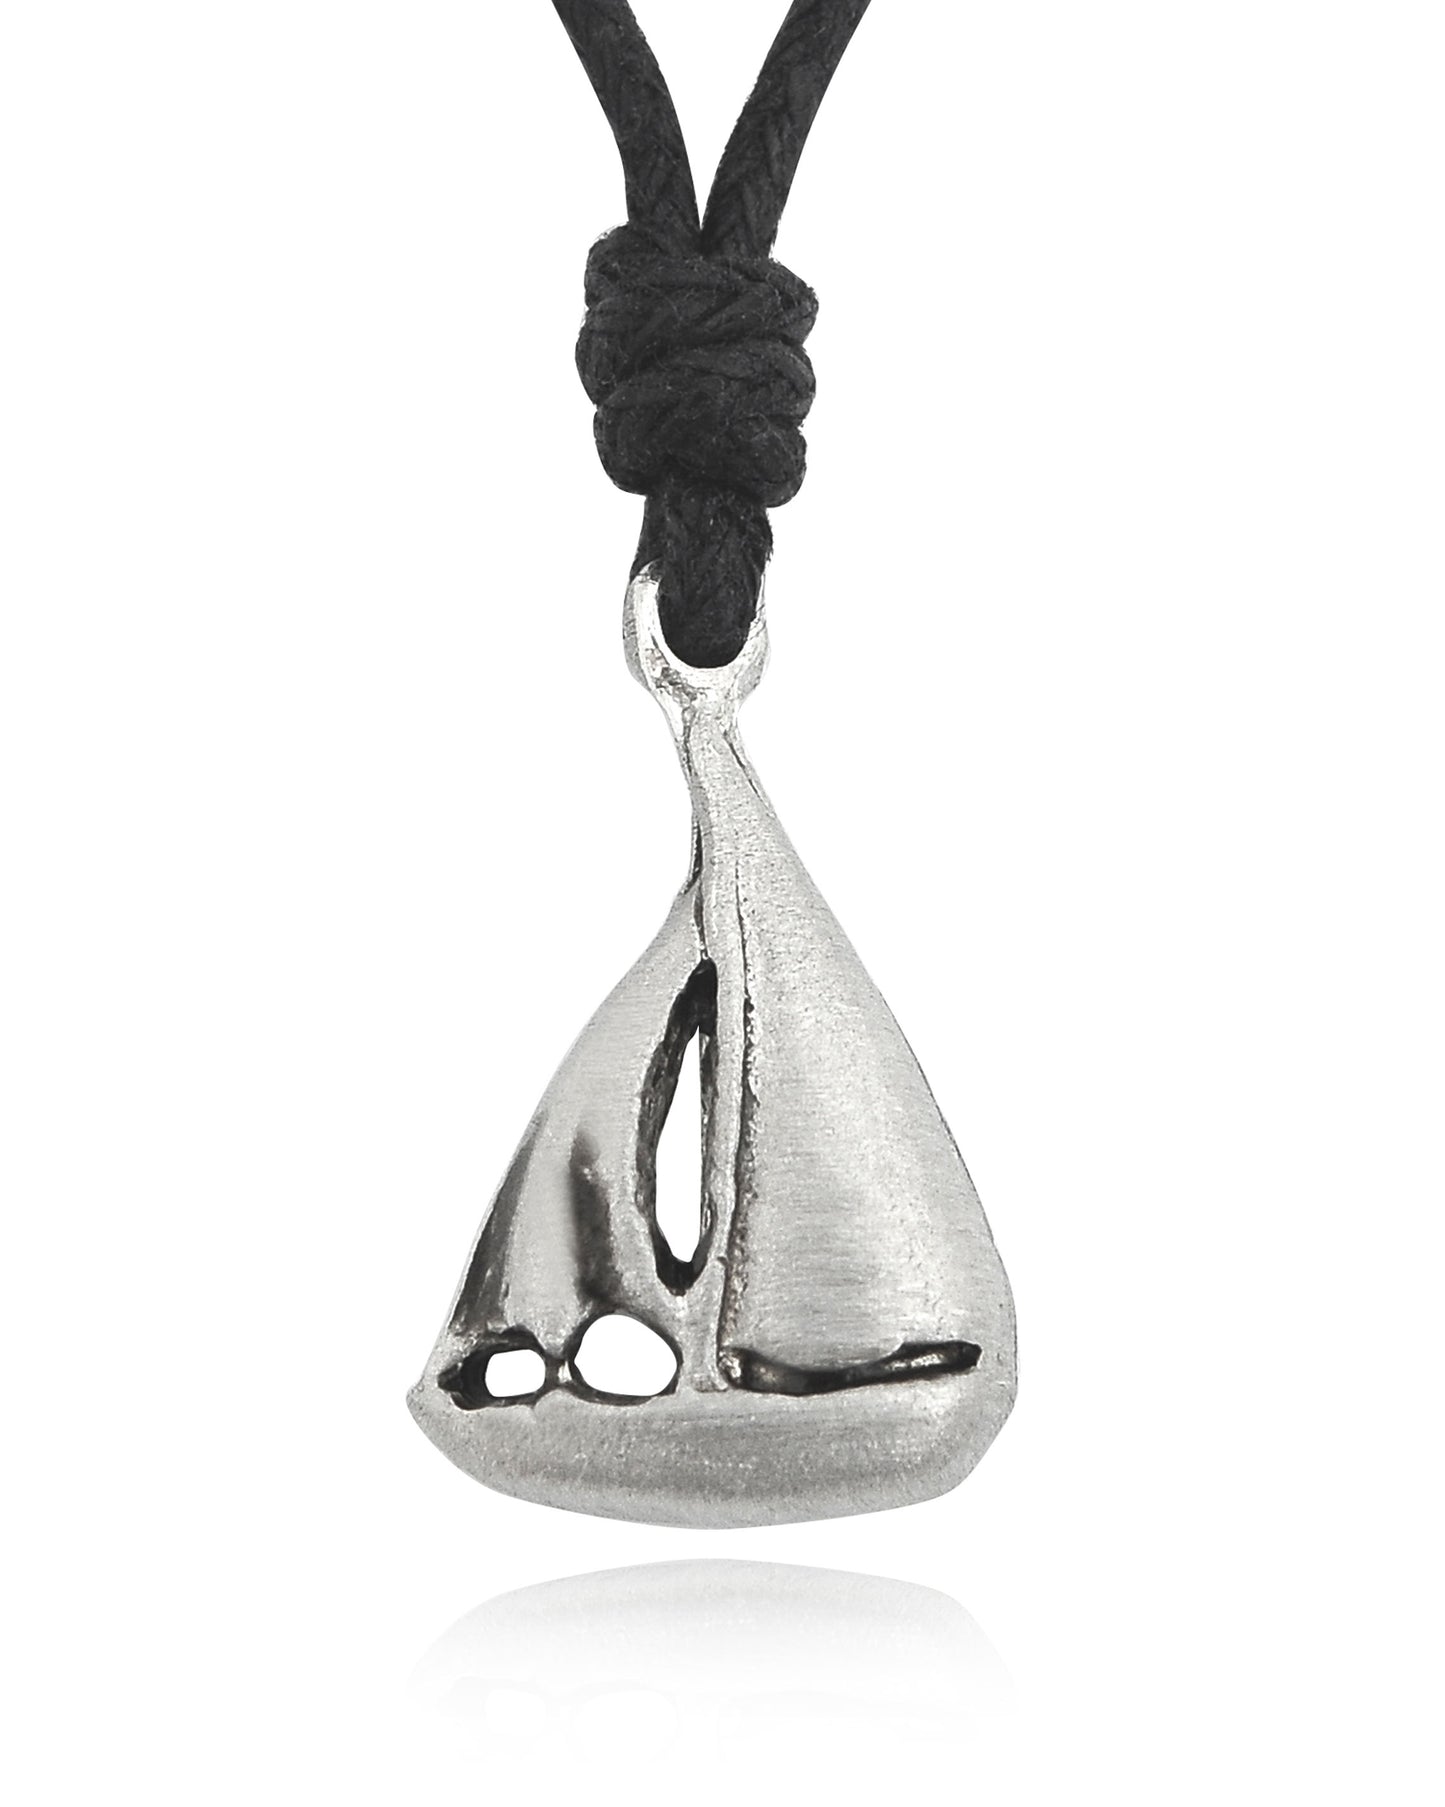 New Sail Boat Silver Pewter Charm Necklace Pendant Jewelry With Cotton Cord